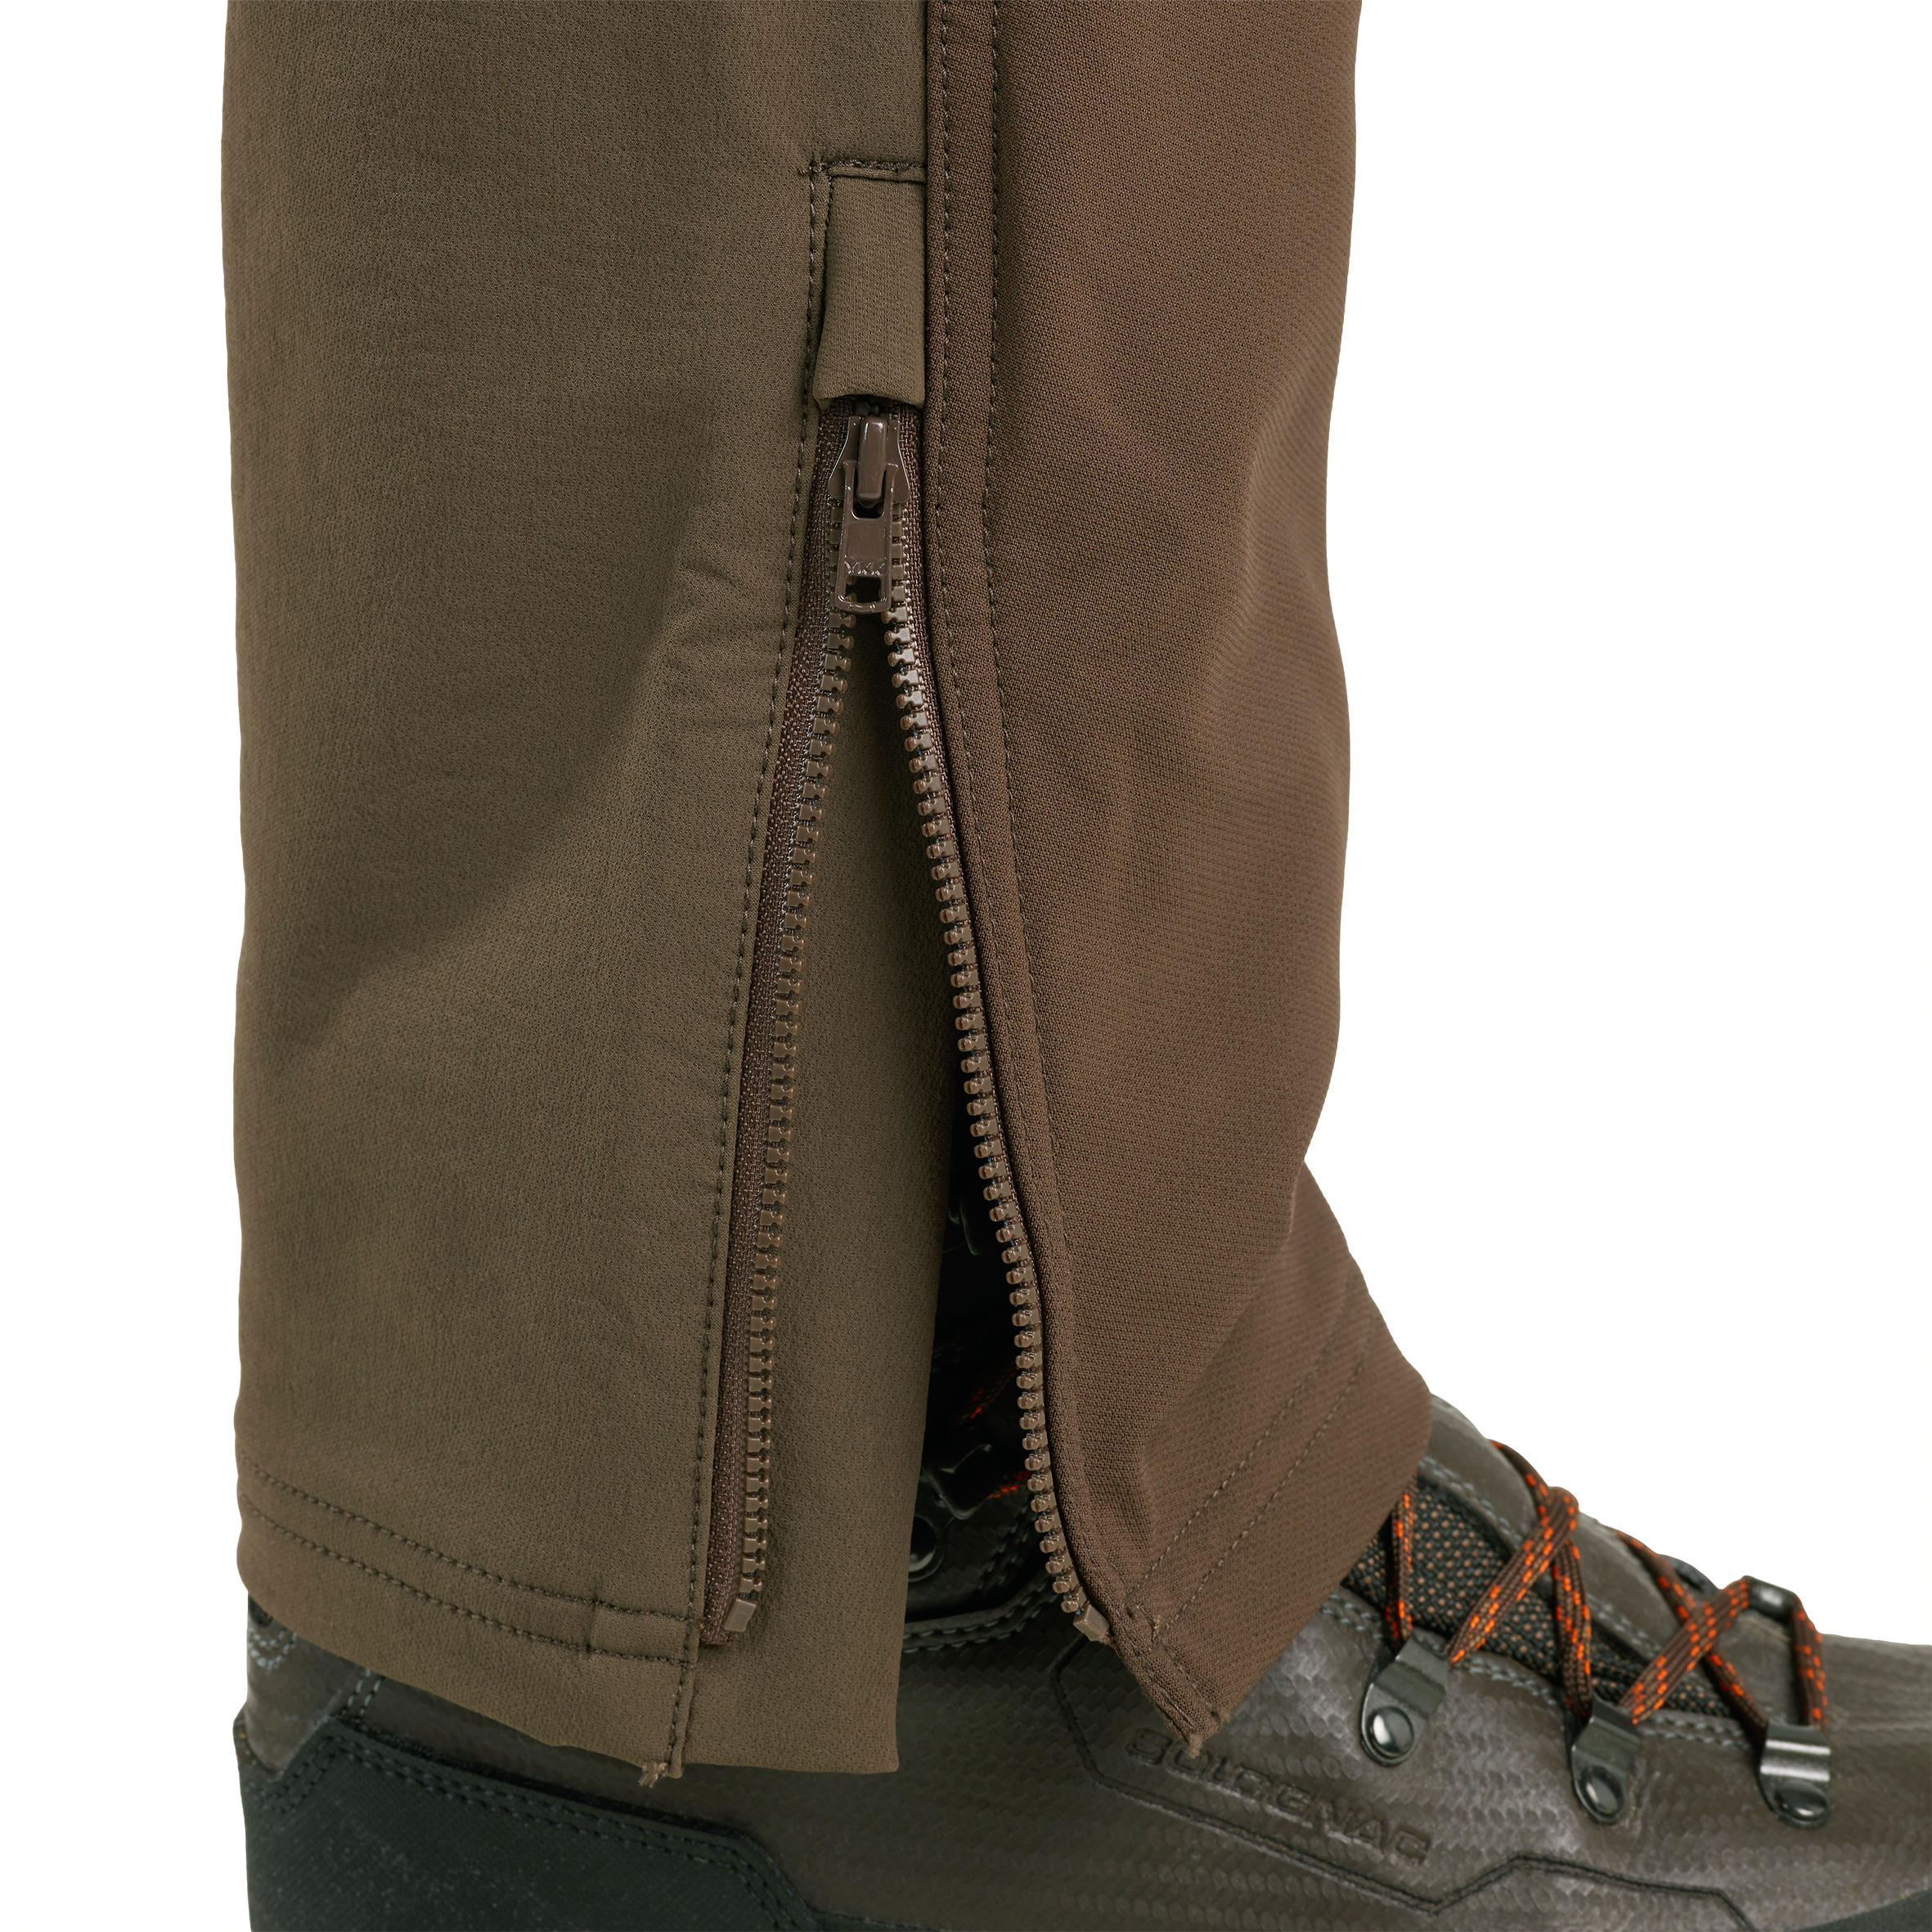 Hunting Trousers for Dry-Weather - Renfort 500 Brown - SOLOGNAC